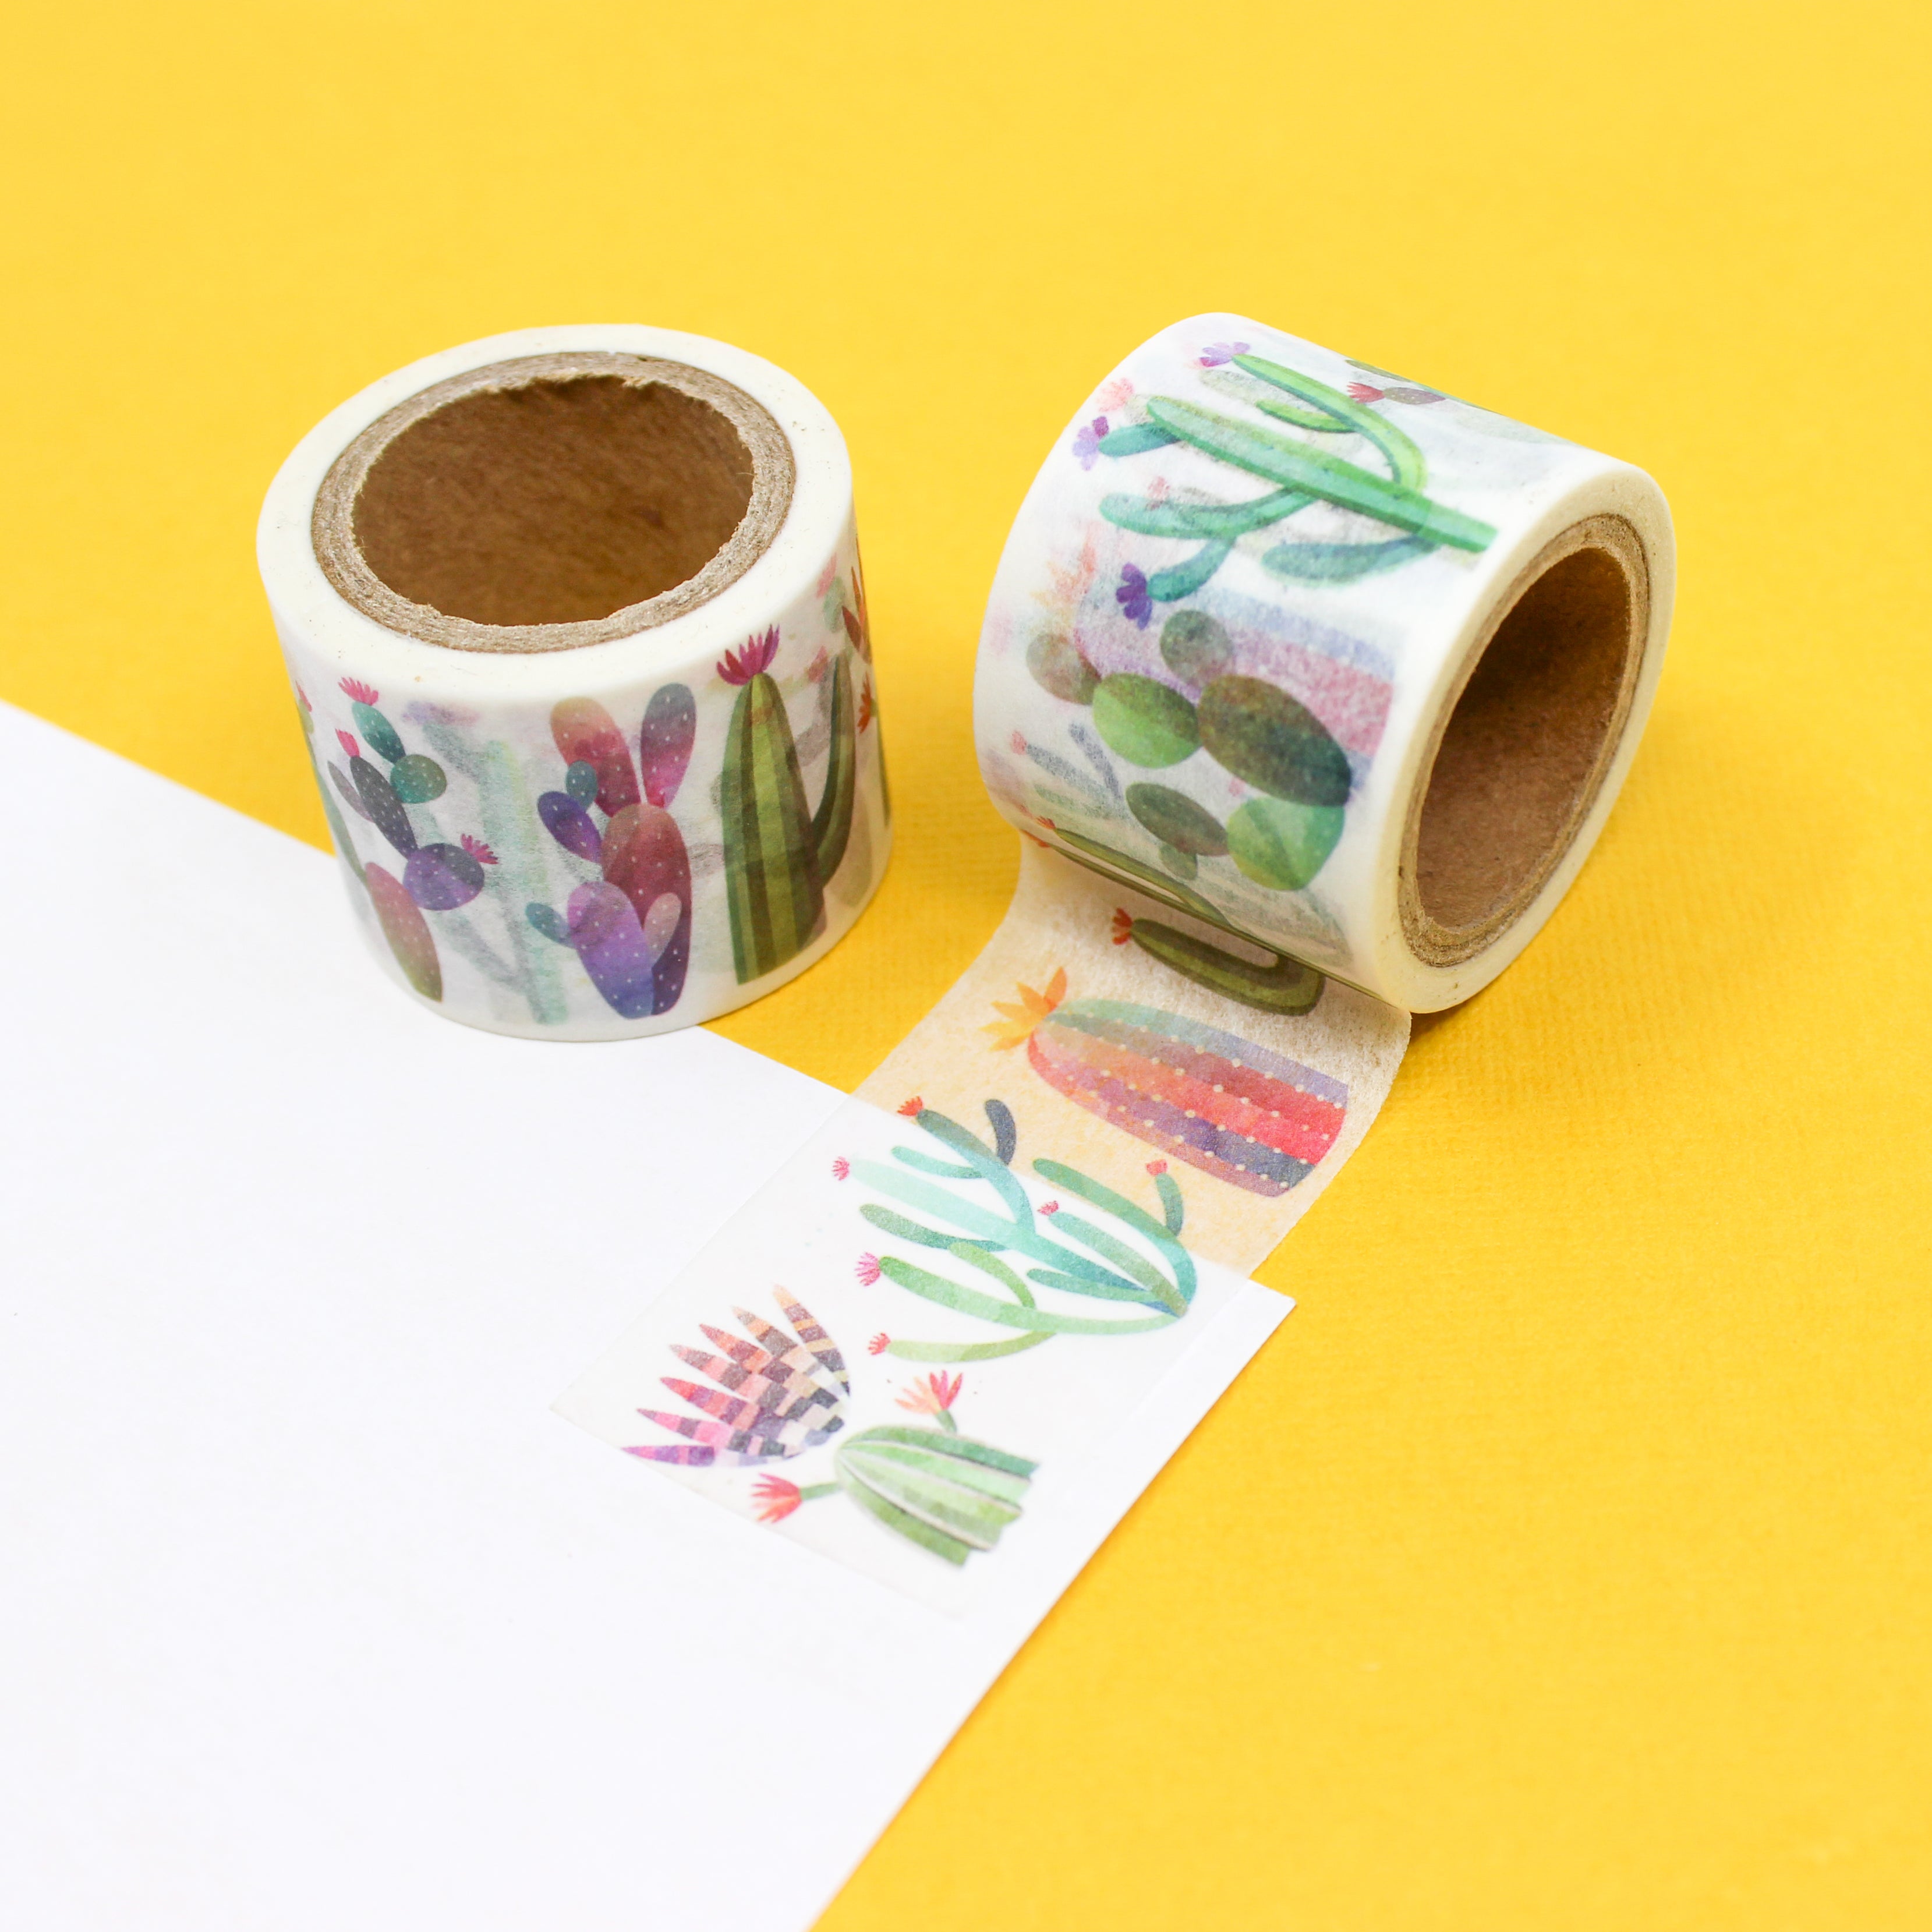 This is a colorful cactus pattern washi tape from BBB Supplies Craft Shop